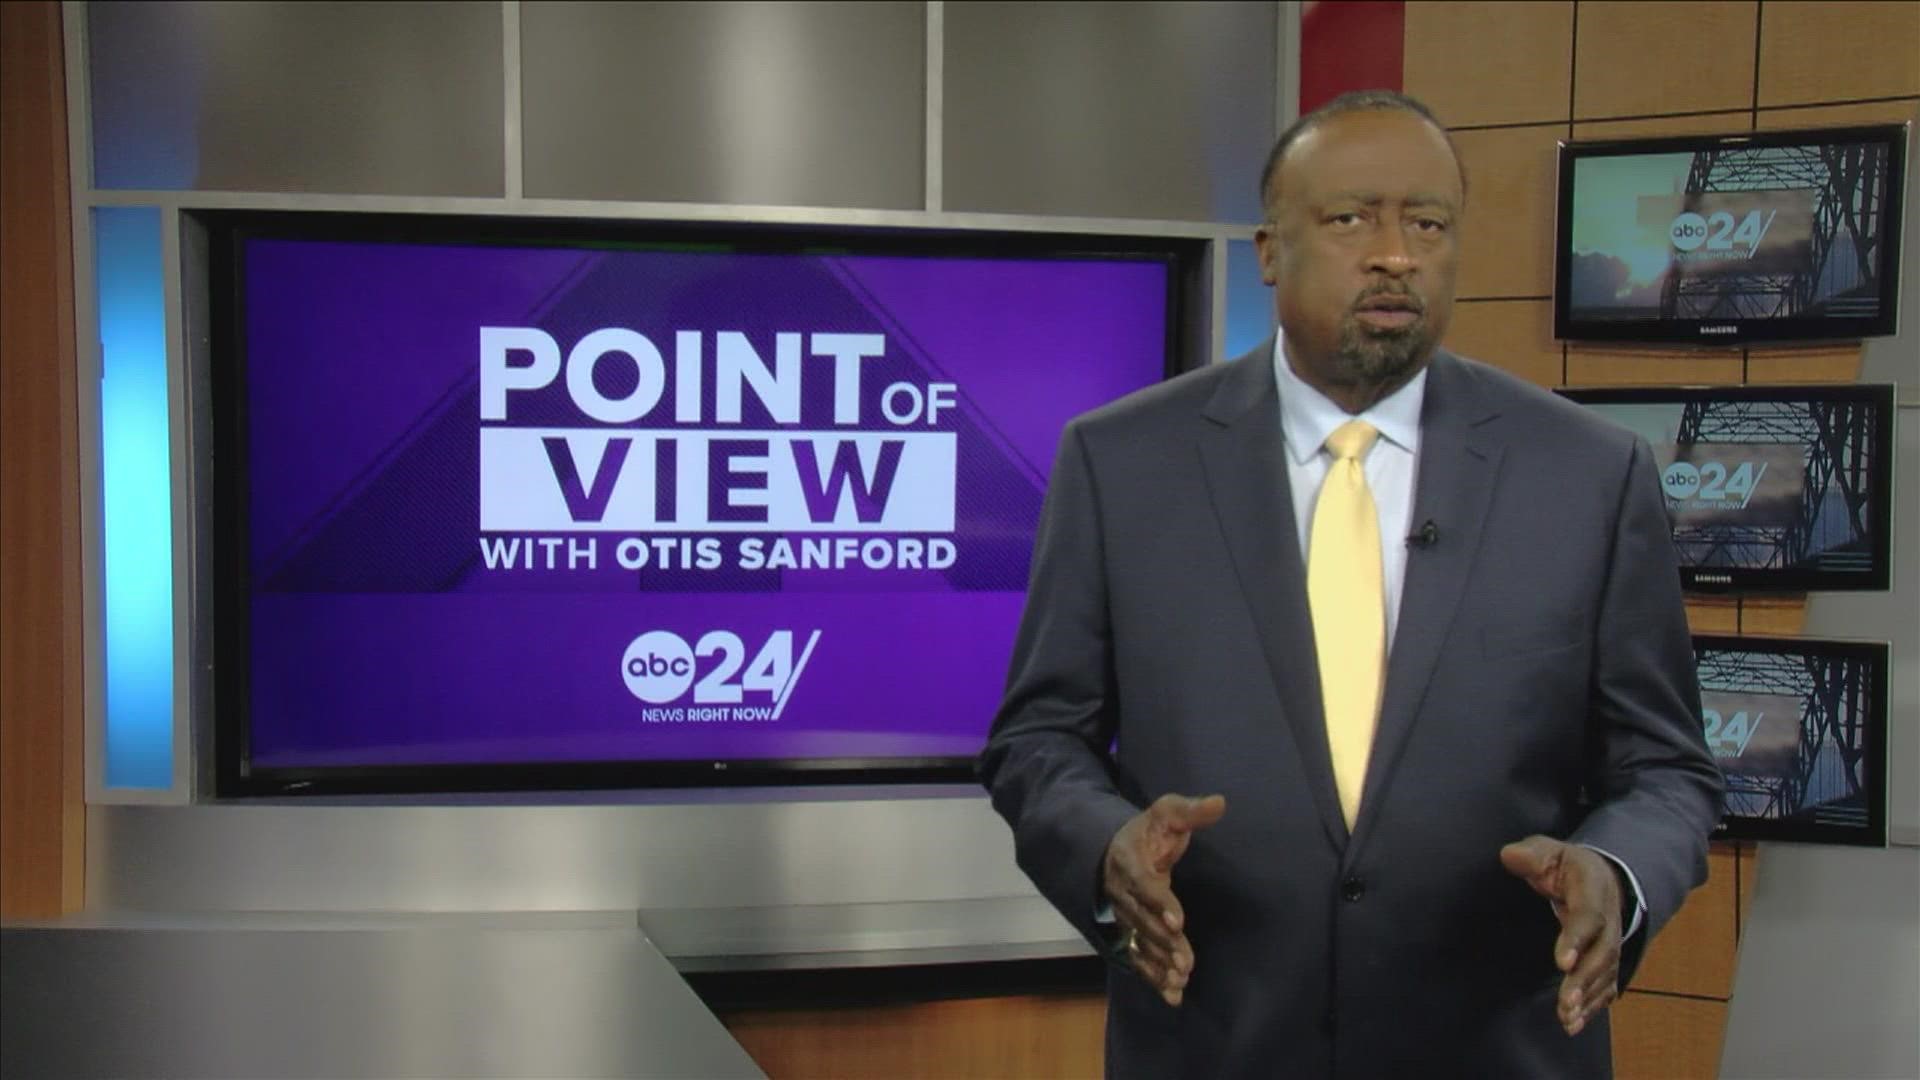 ABC 24 political analyst and commentator Otis Sanford shares his point of view the race for a local Tennessee state Senate seat.